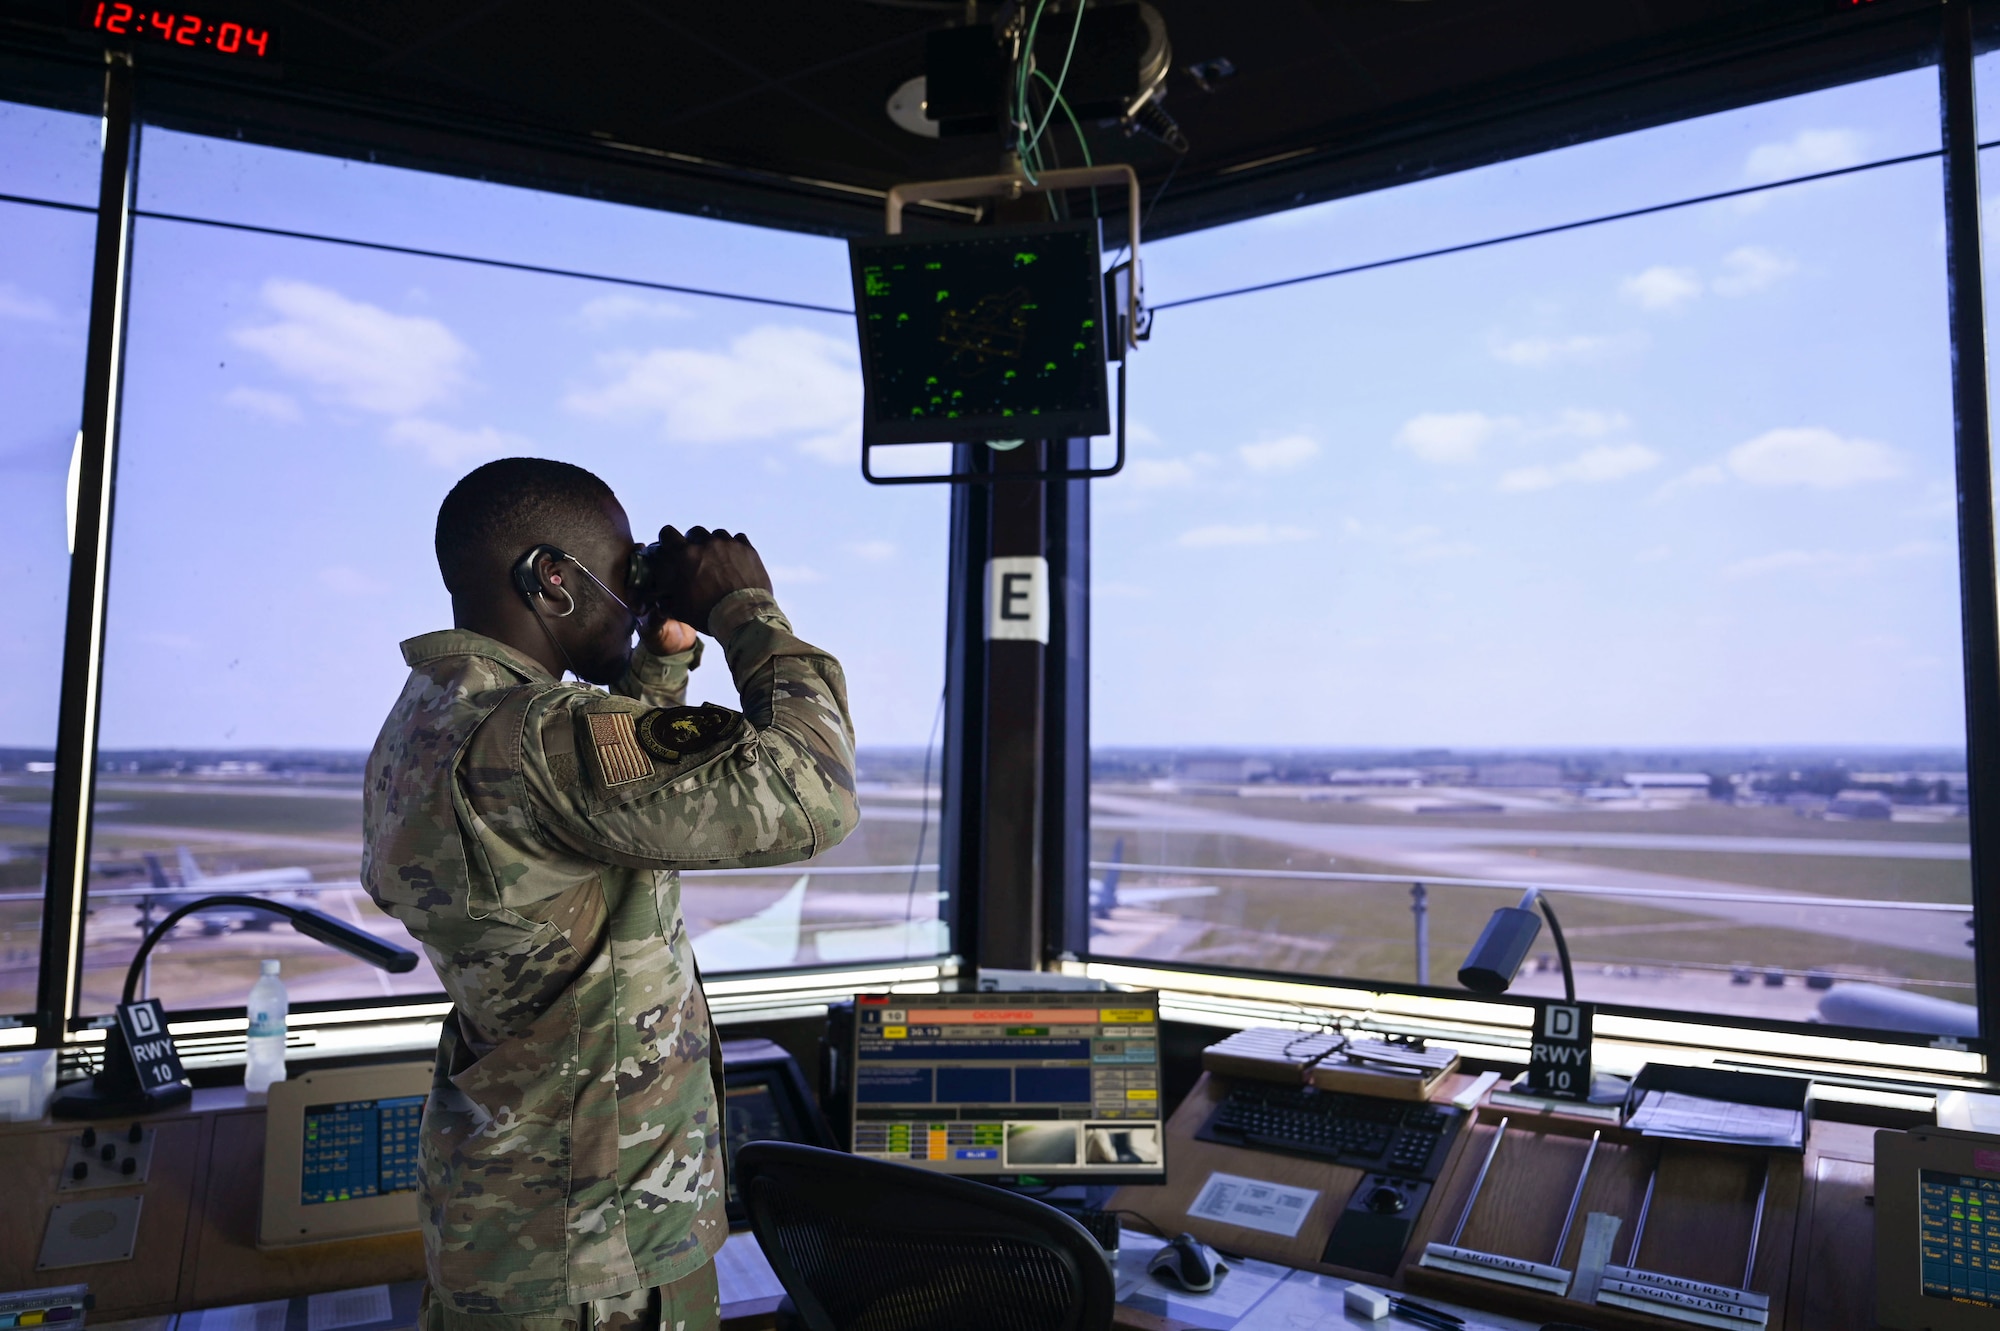 Link - RAF Mildenhall Air Traffic Controllers protect the ground and skies